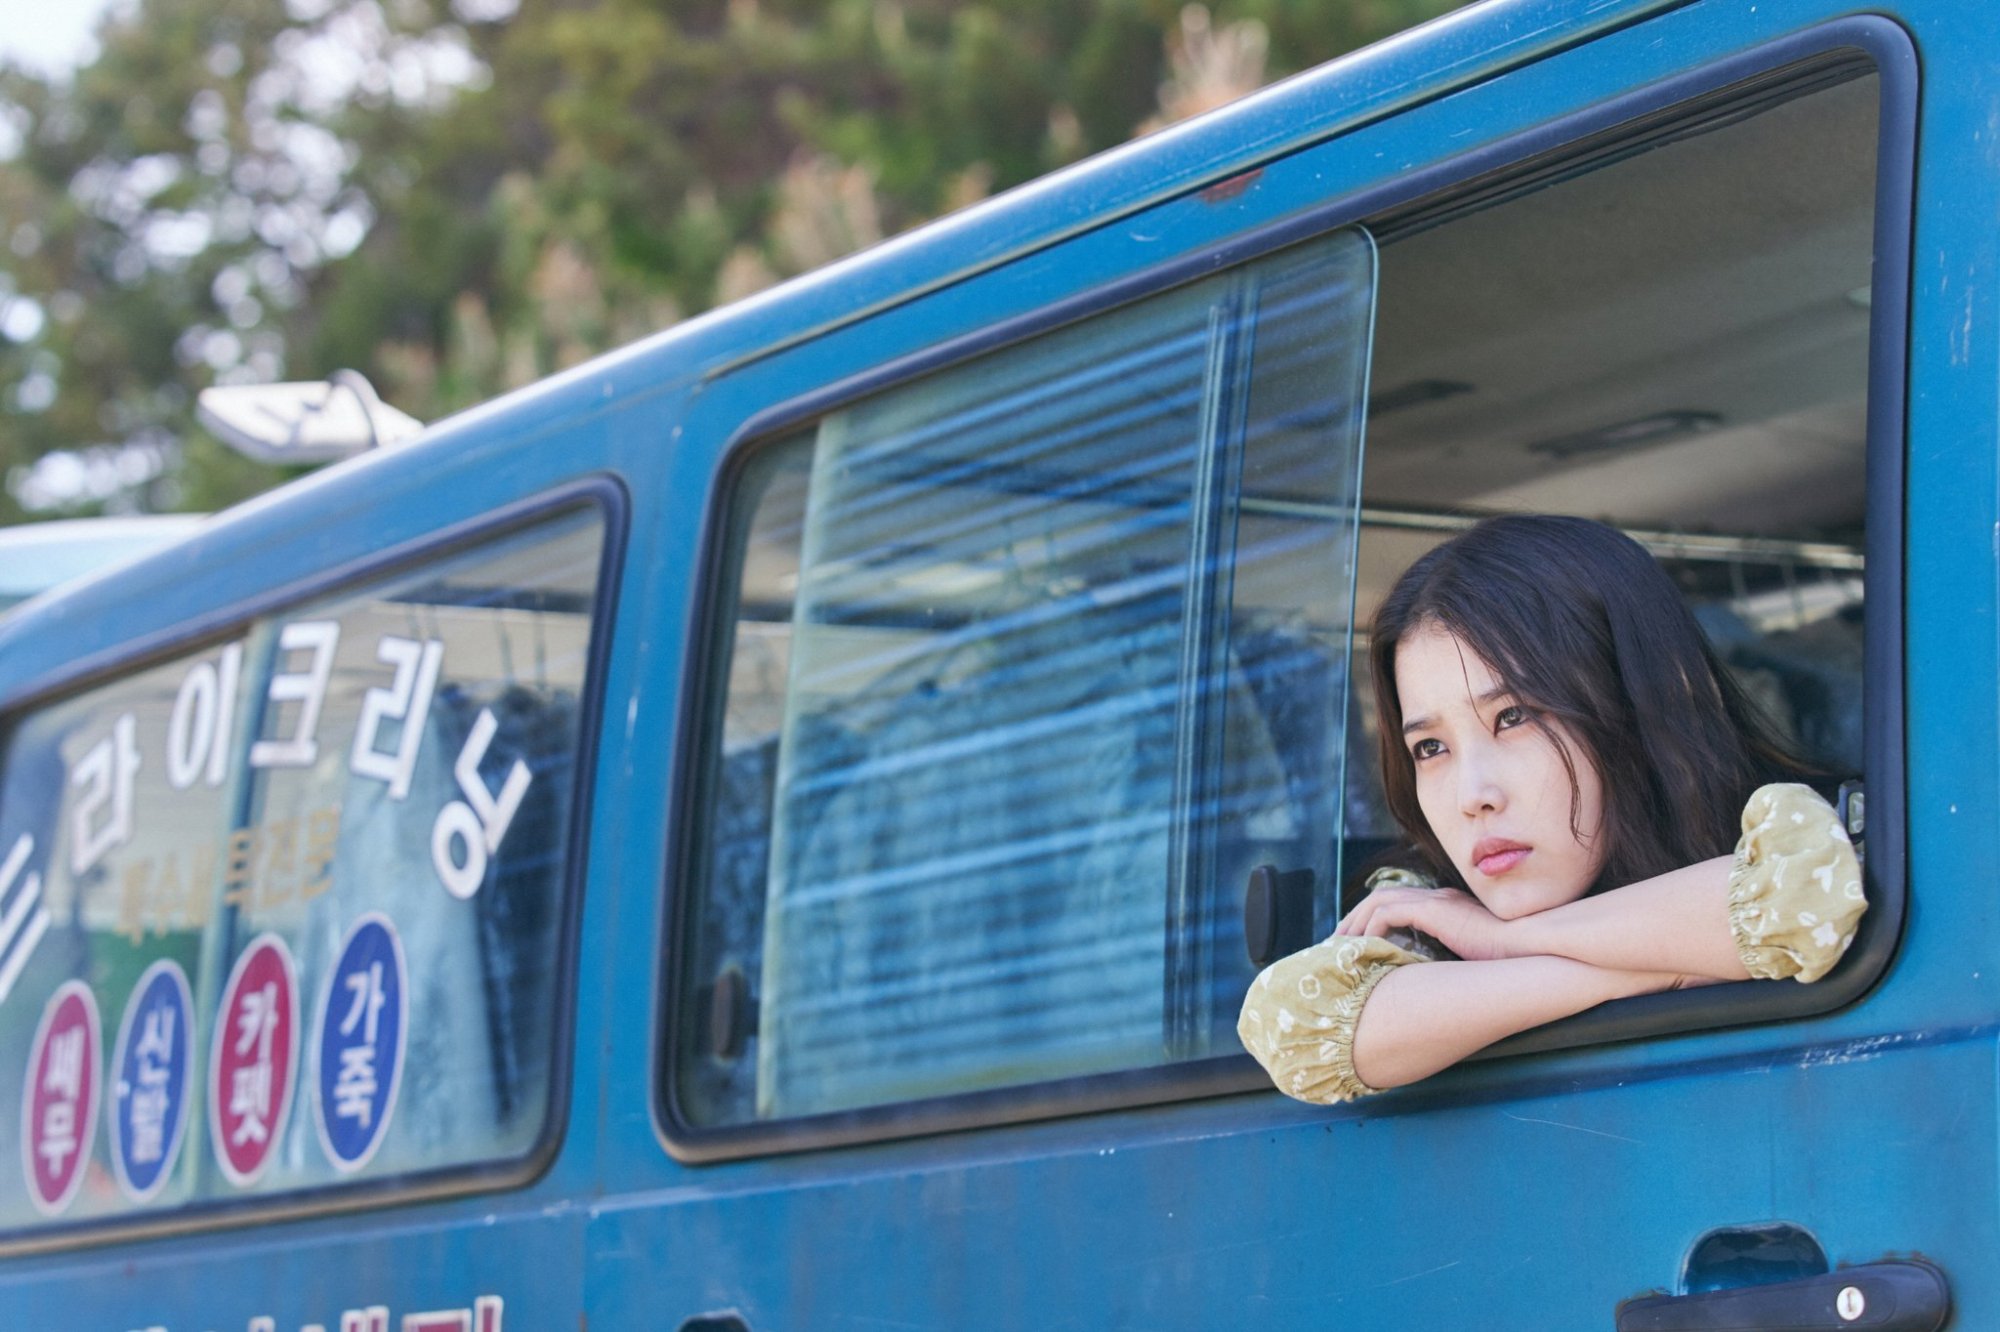 a young woman leans out a van window, gazing forlornly